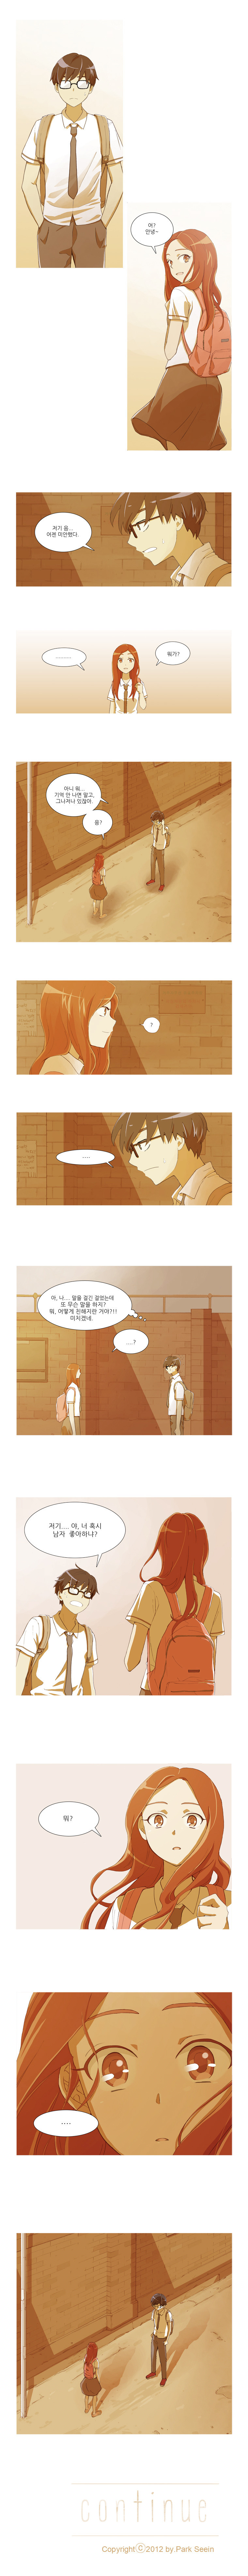 Gaussian Blur - Chapter 02 - Page 4